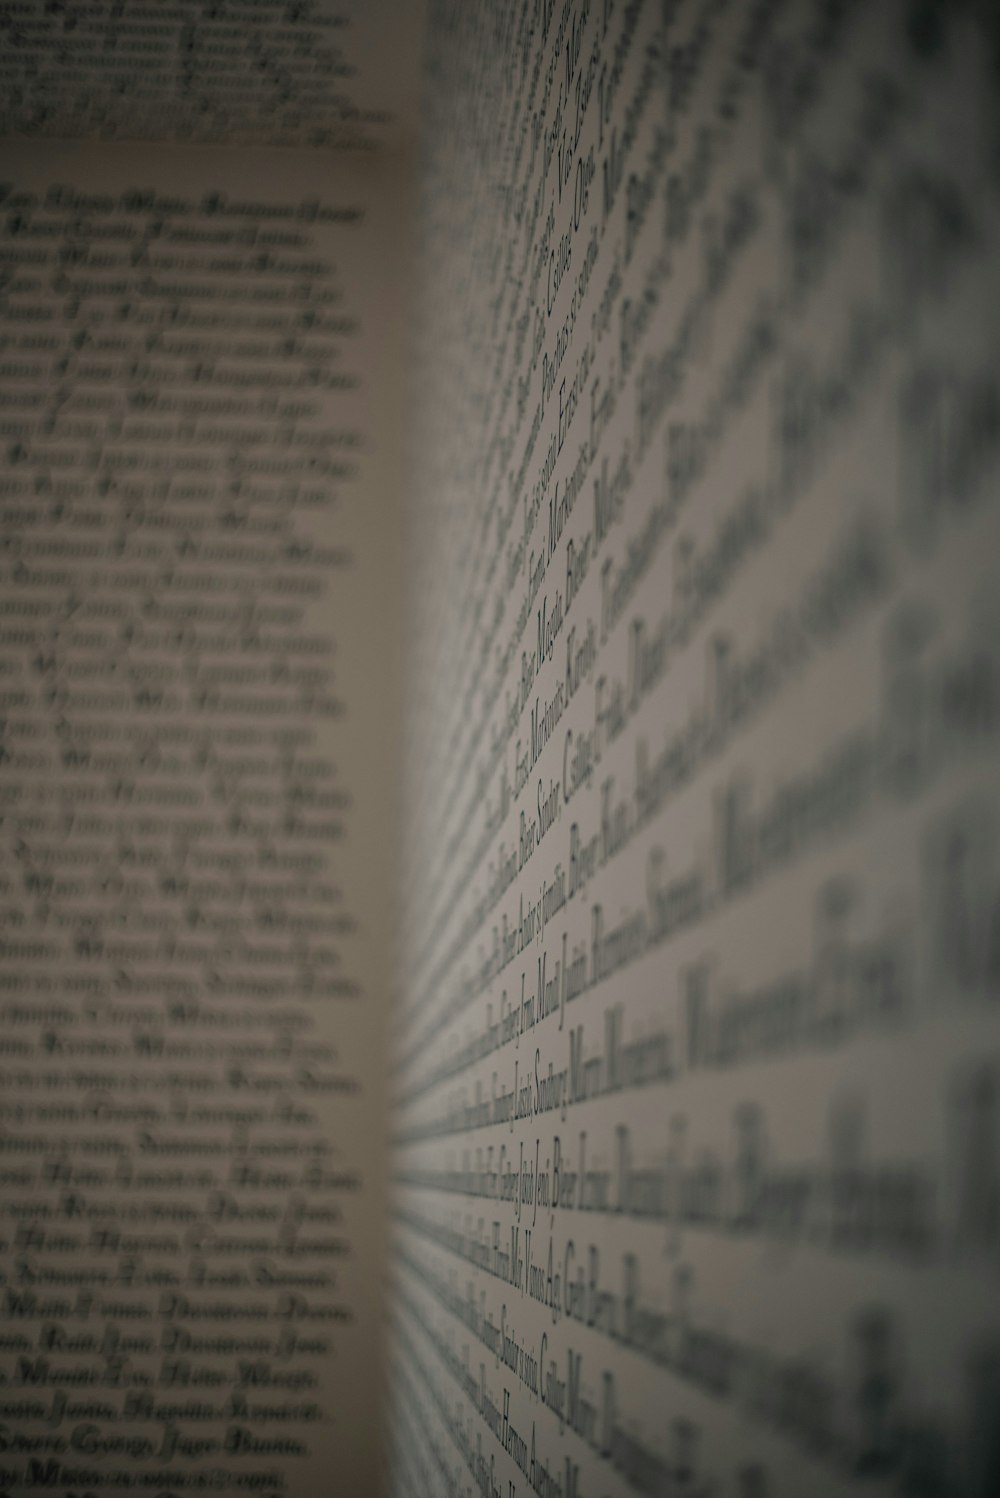 a close up of a book with a blurry background